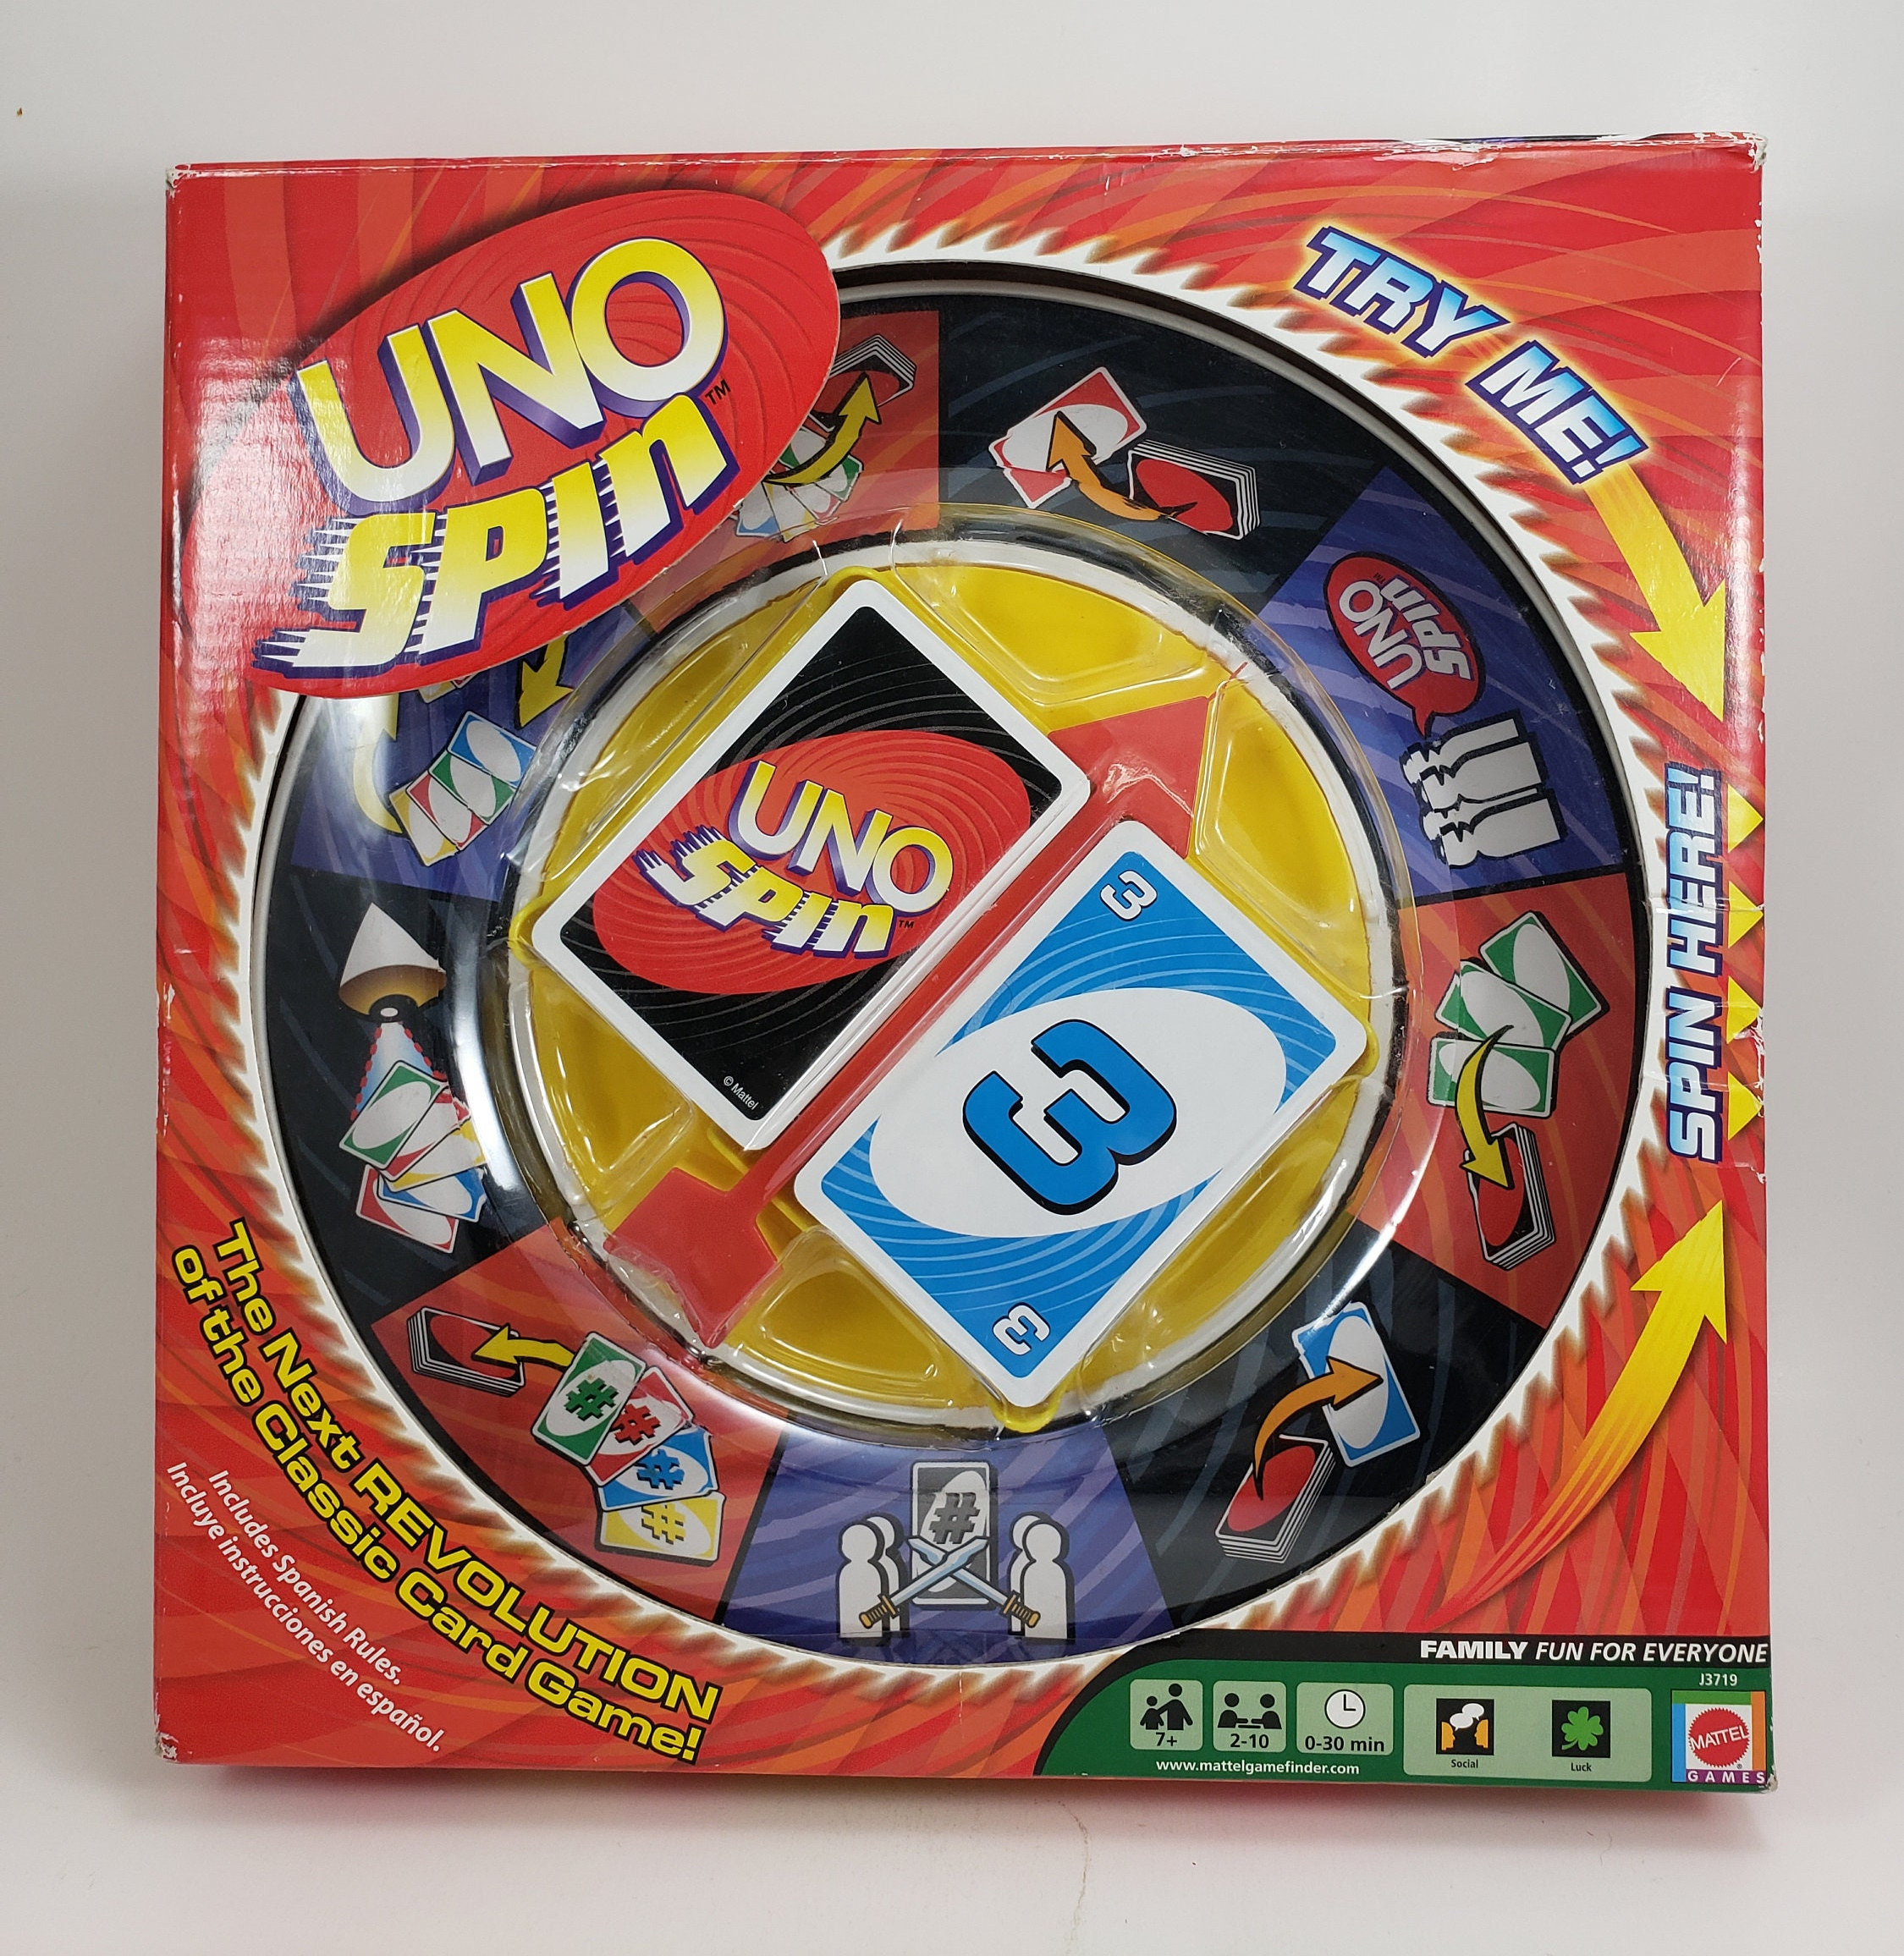 English Uno Card Game Rules by English and Spanish Language Ideas